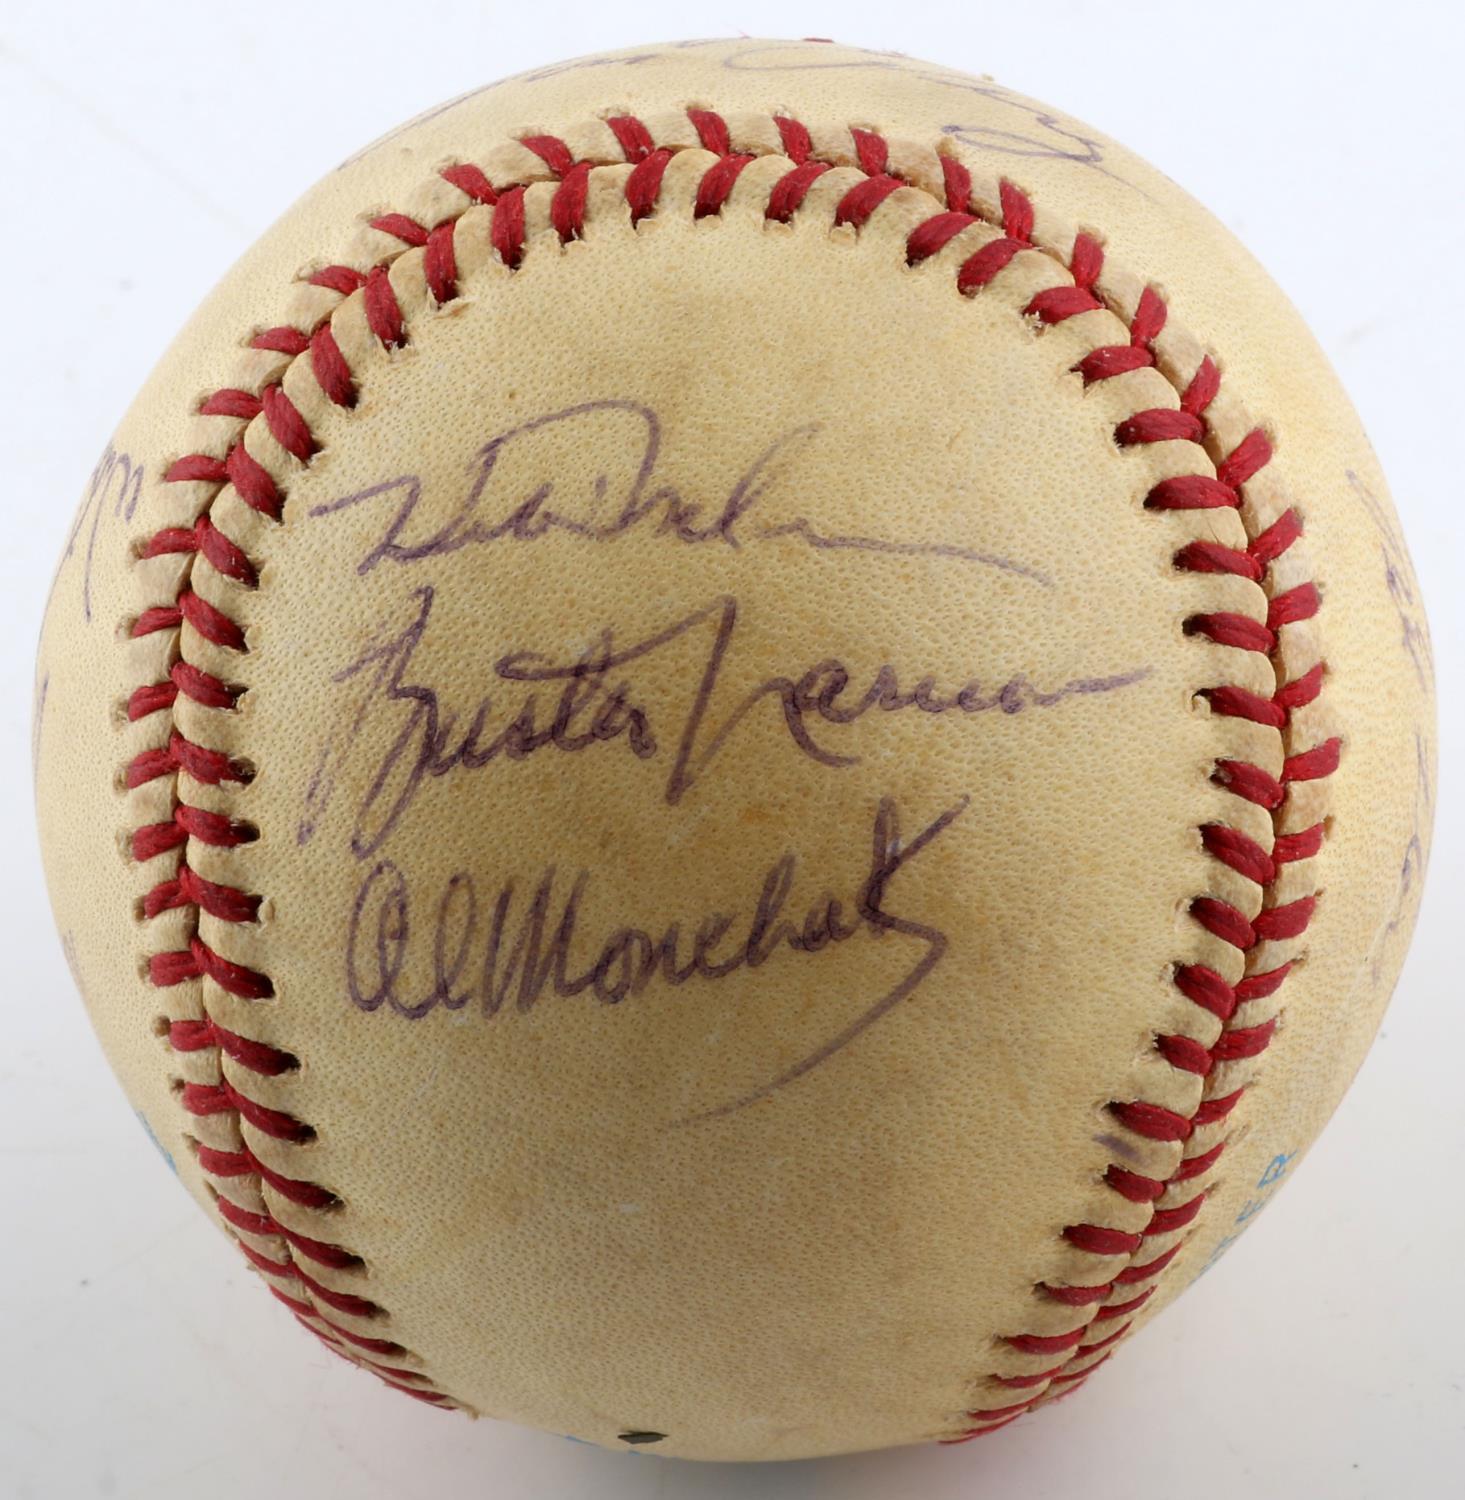 1960S COMPOSITE SIGNED BASEBALL STARGELL JARVIS